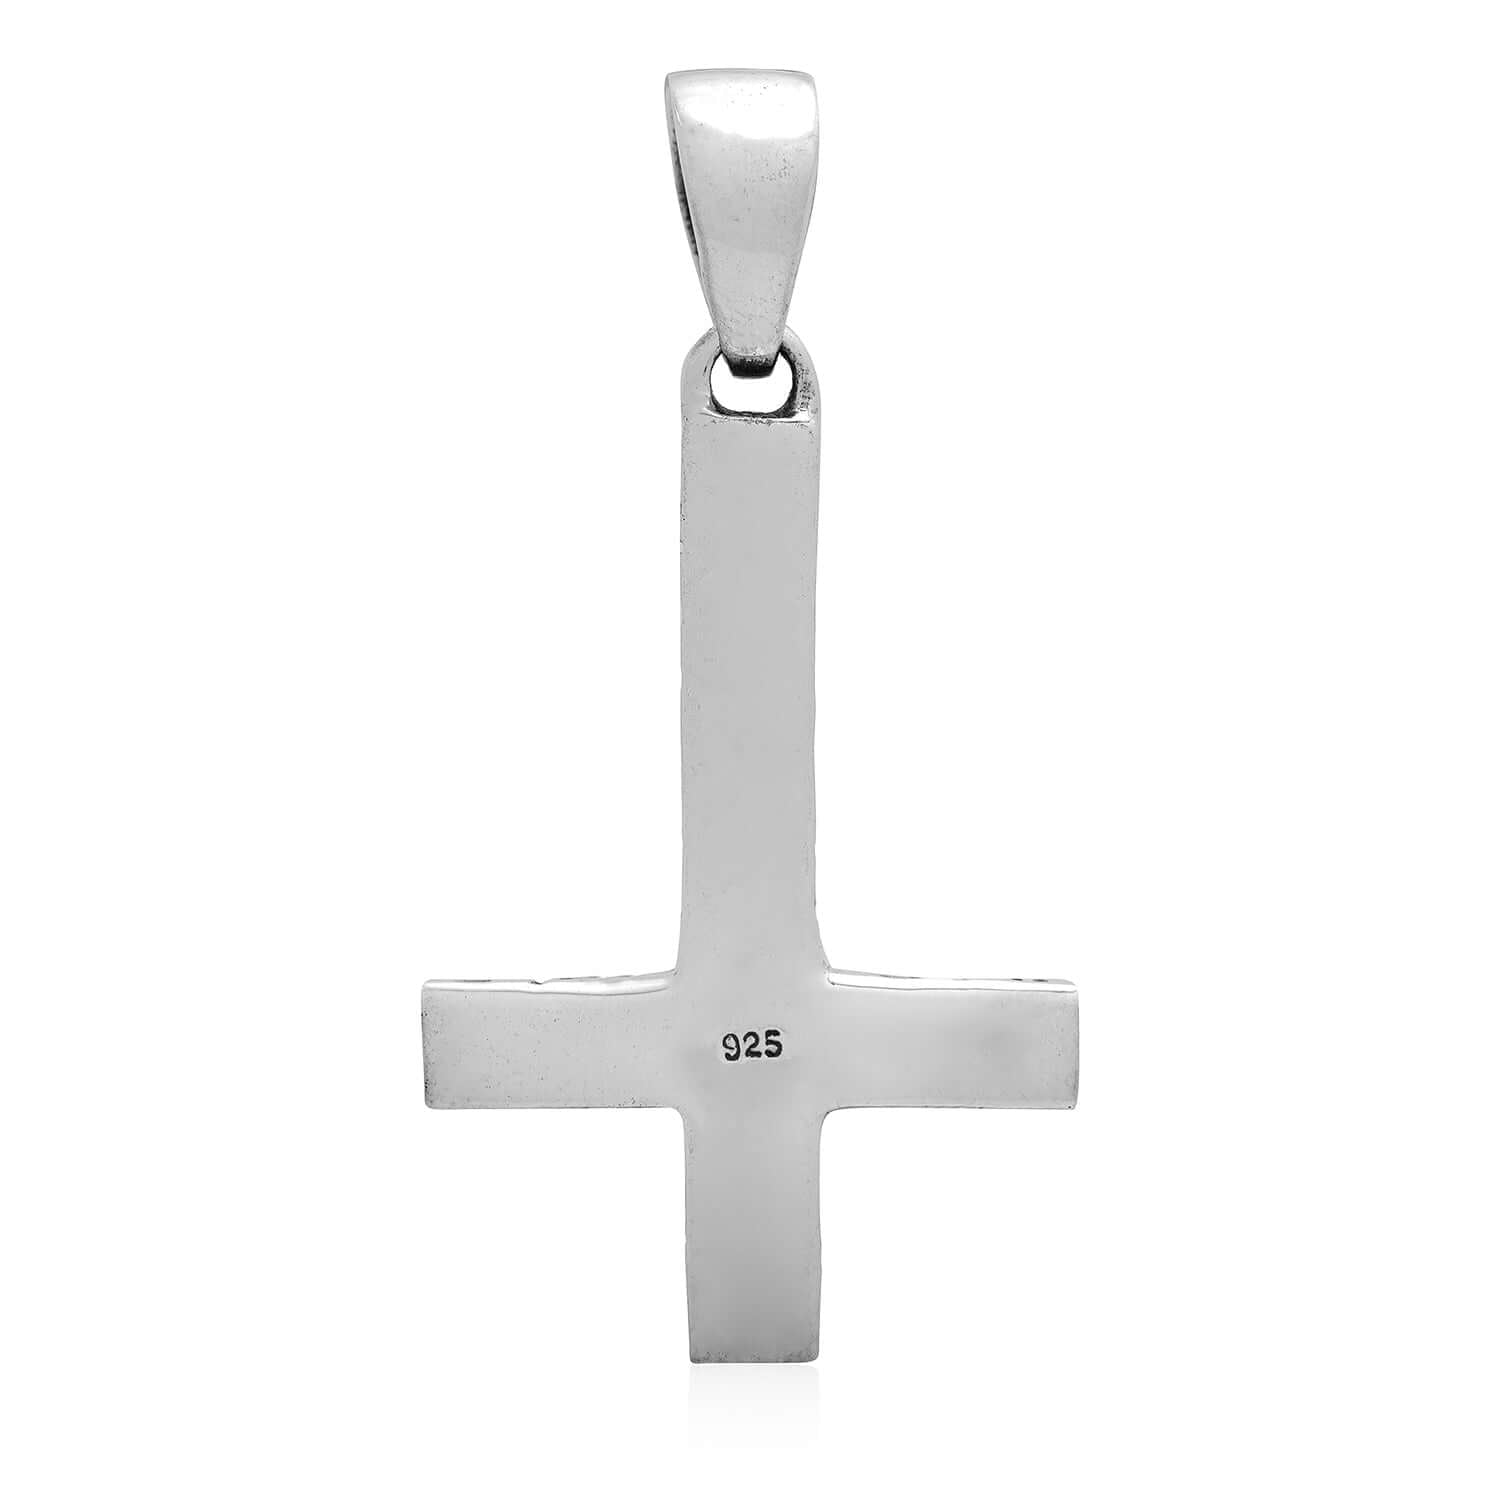 925 Sterling Silver Inverted Cross Satanic Pendant with Black Enamel - SilverMania925